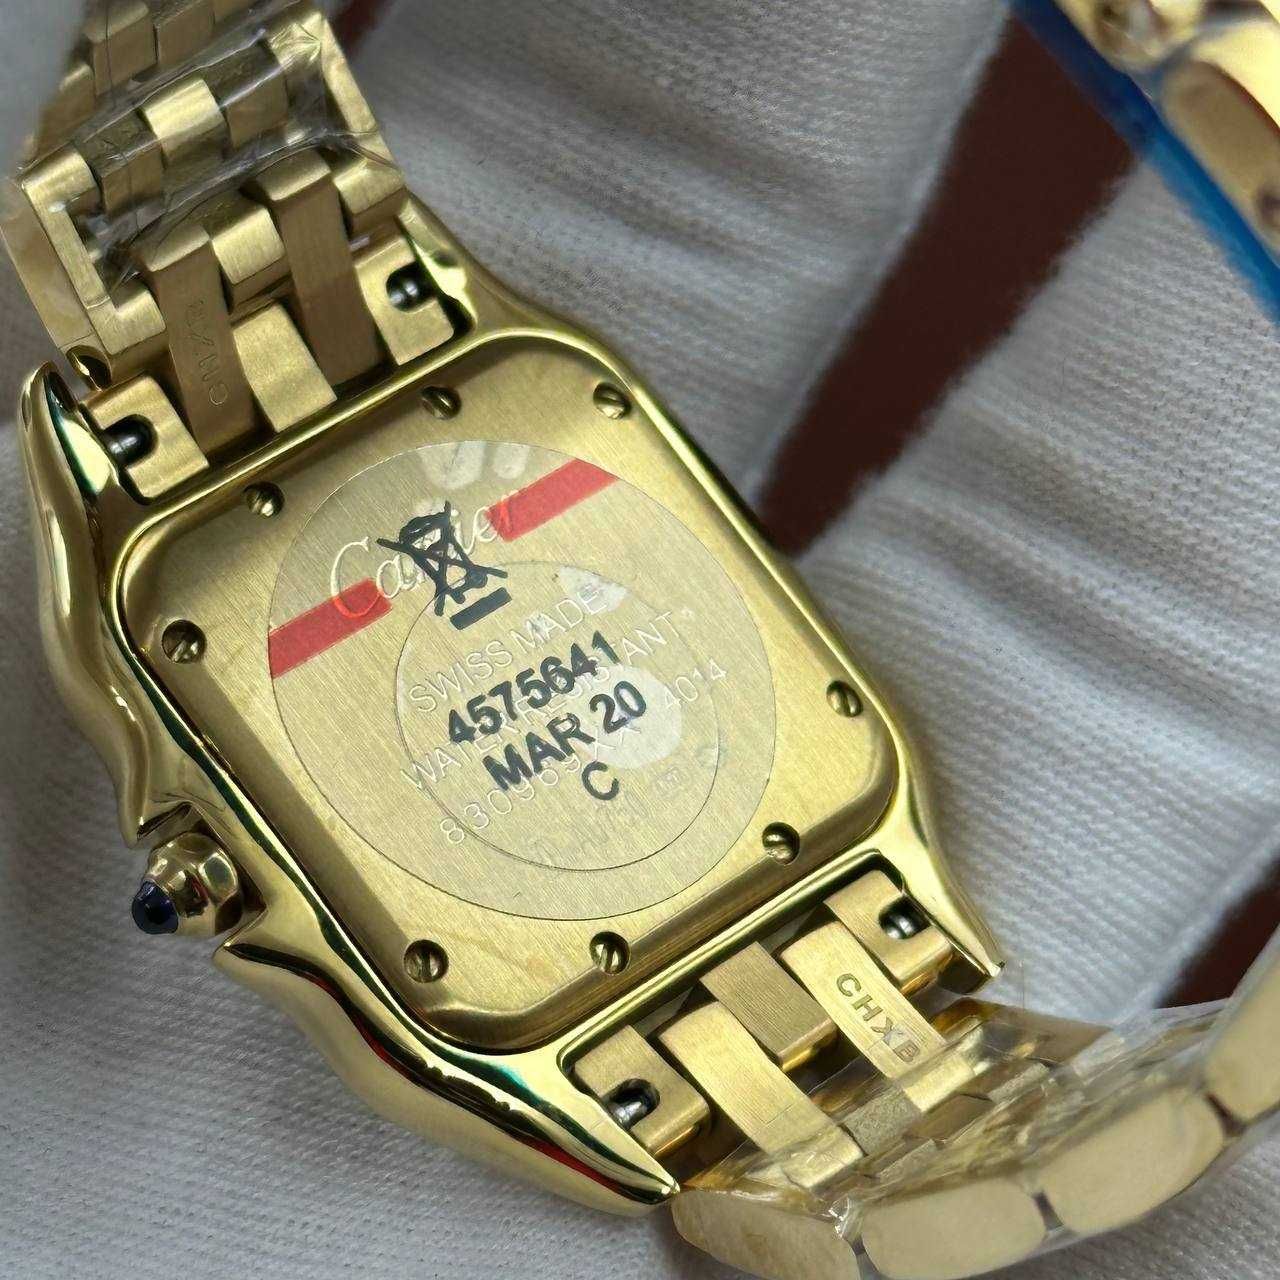 Cartier Panthere watch Yellow Gold 4014 WPGN0038